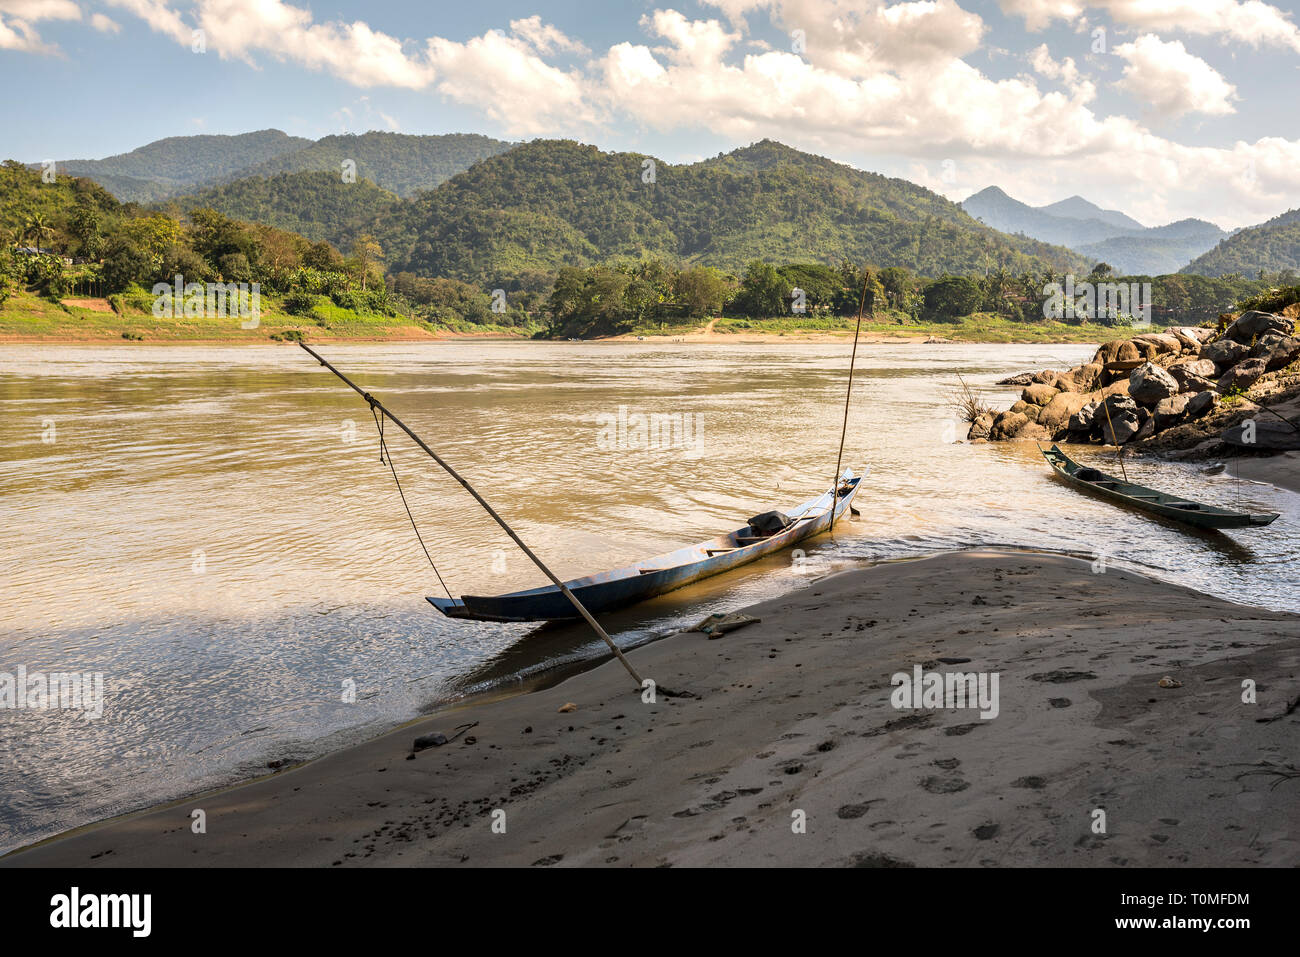 Small boat on the banks of the Mekong, Laos Stock Photo